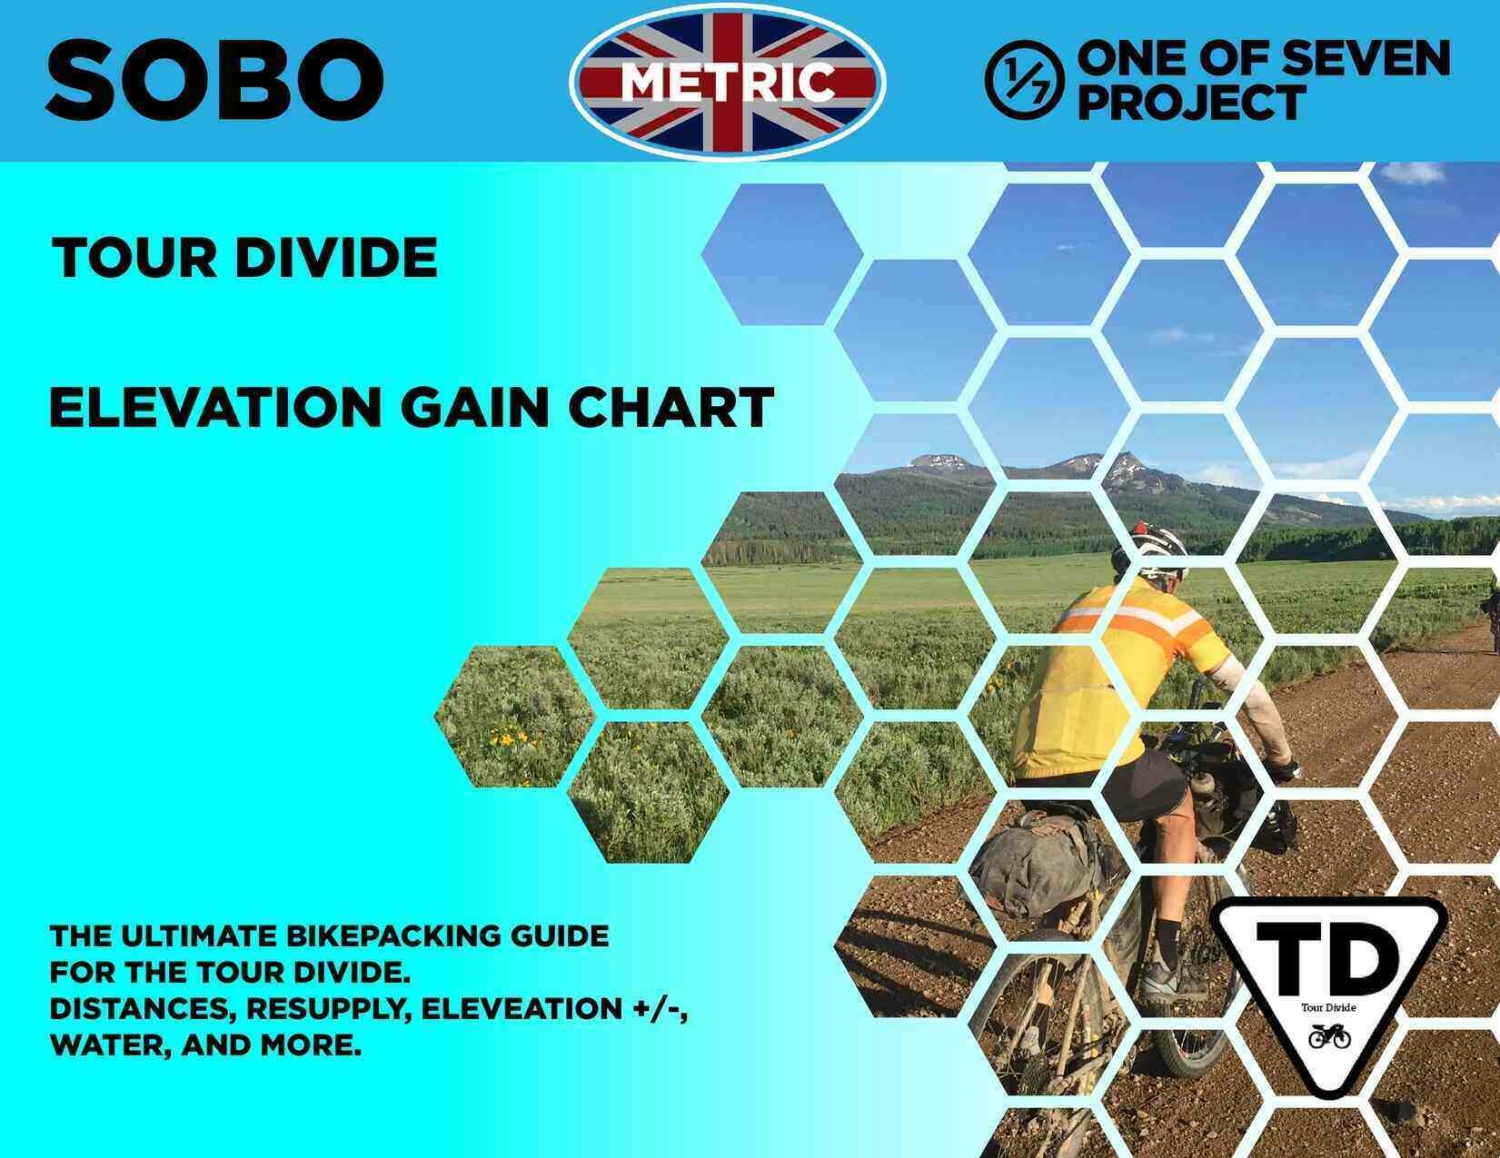 Tour Divide SOBO Elevation Gain Chart Cover bikepacking guides planning aids